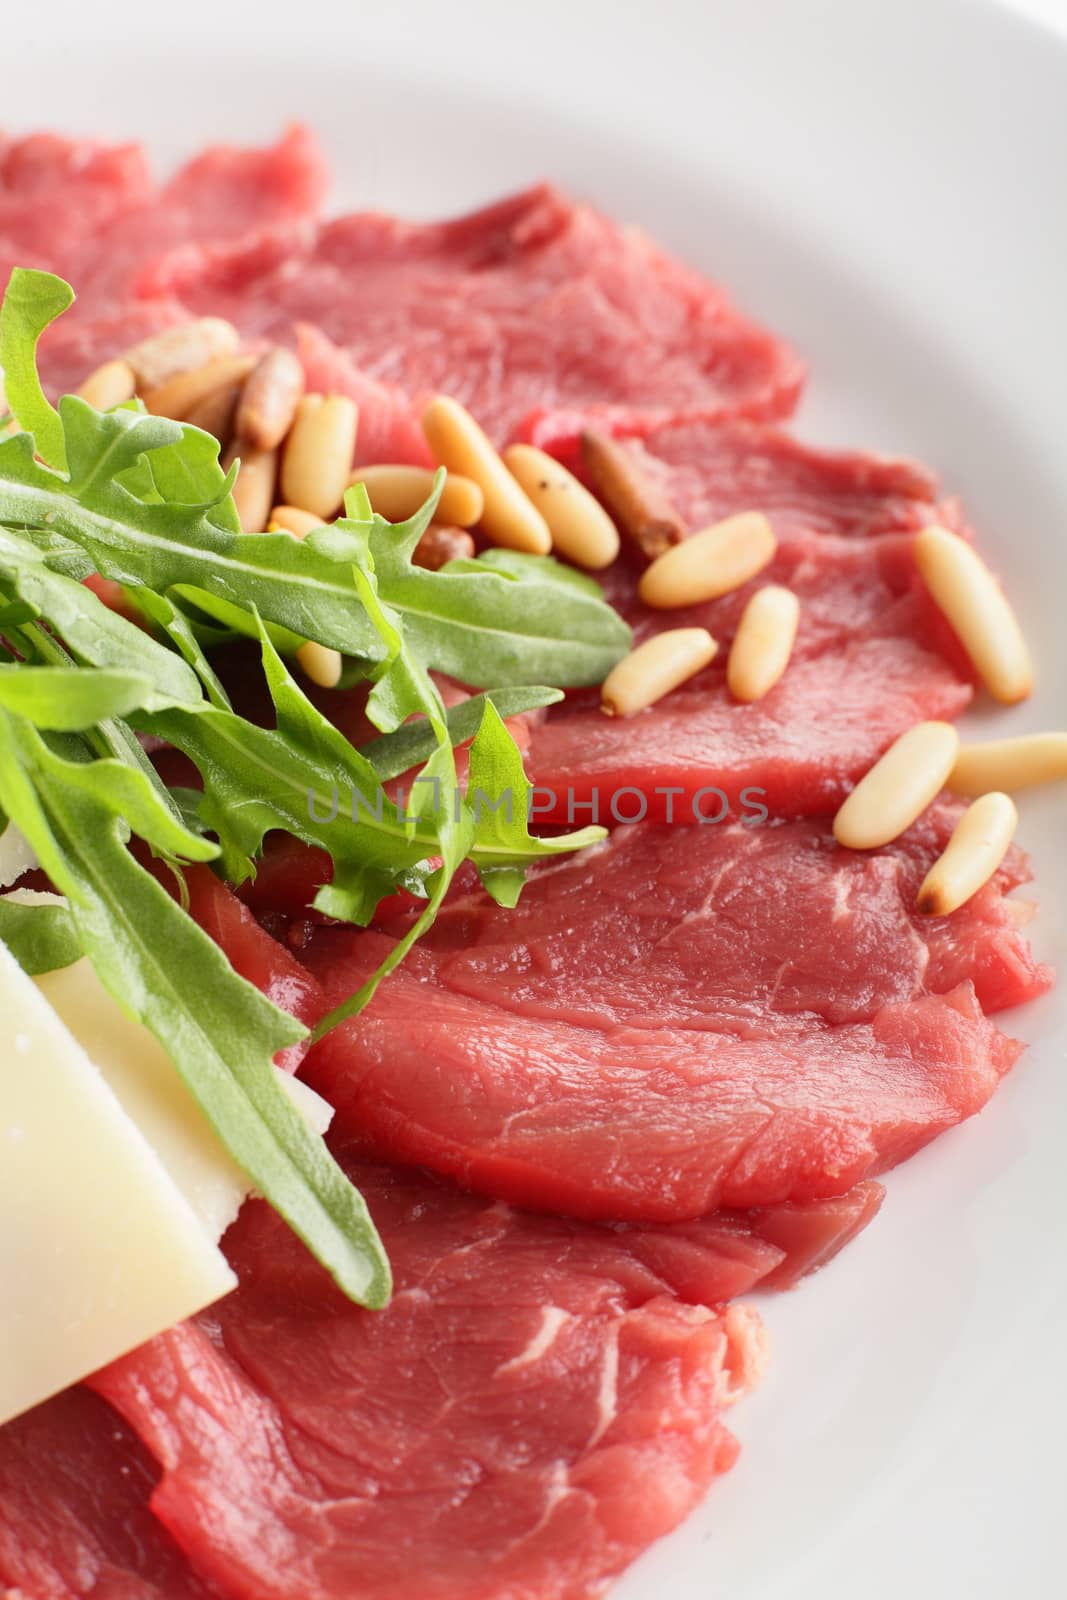 hot and tasty peaces of meat with garnish